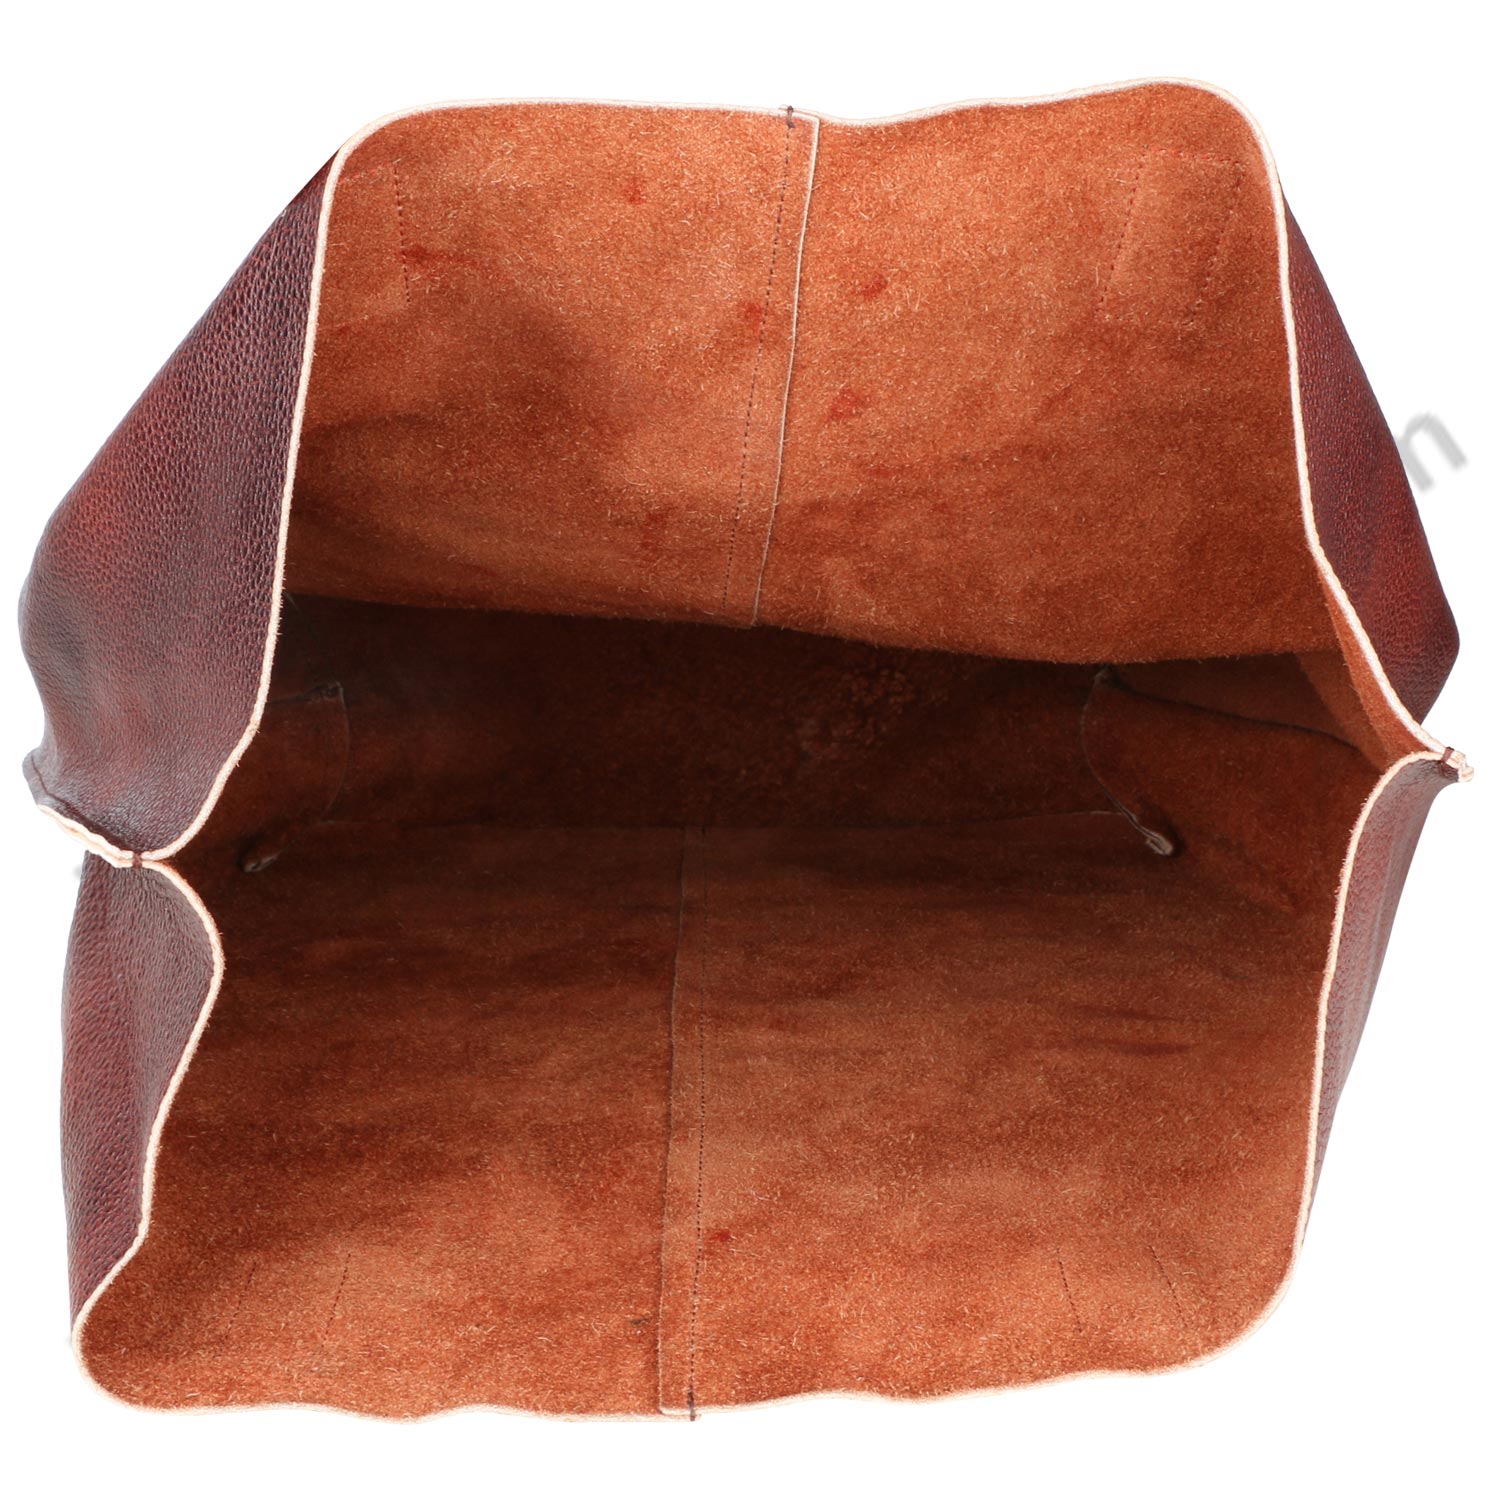 Open inside image of brown LUFT SHOPPING BAG